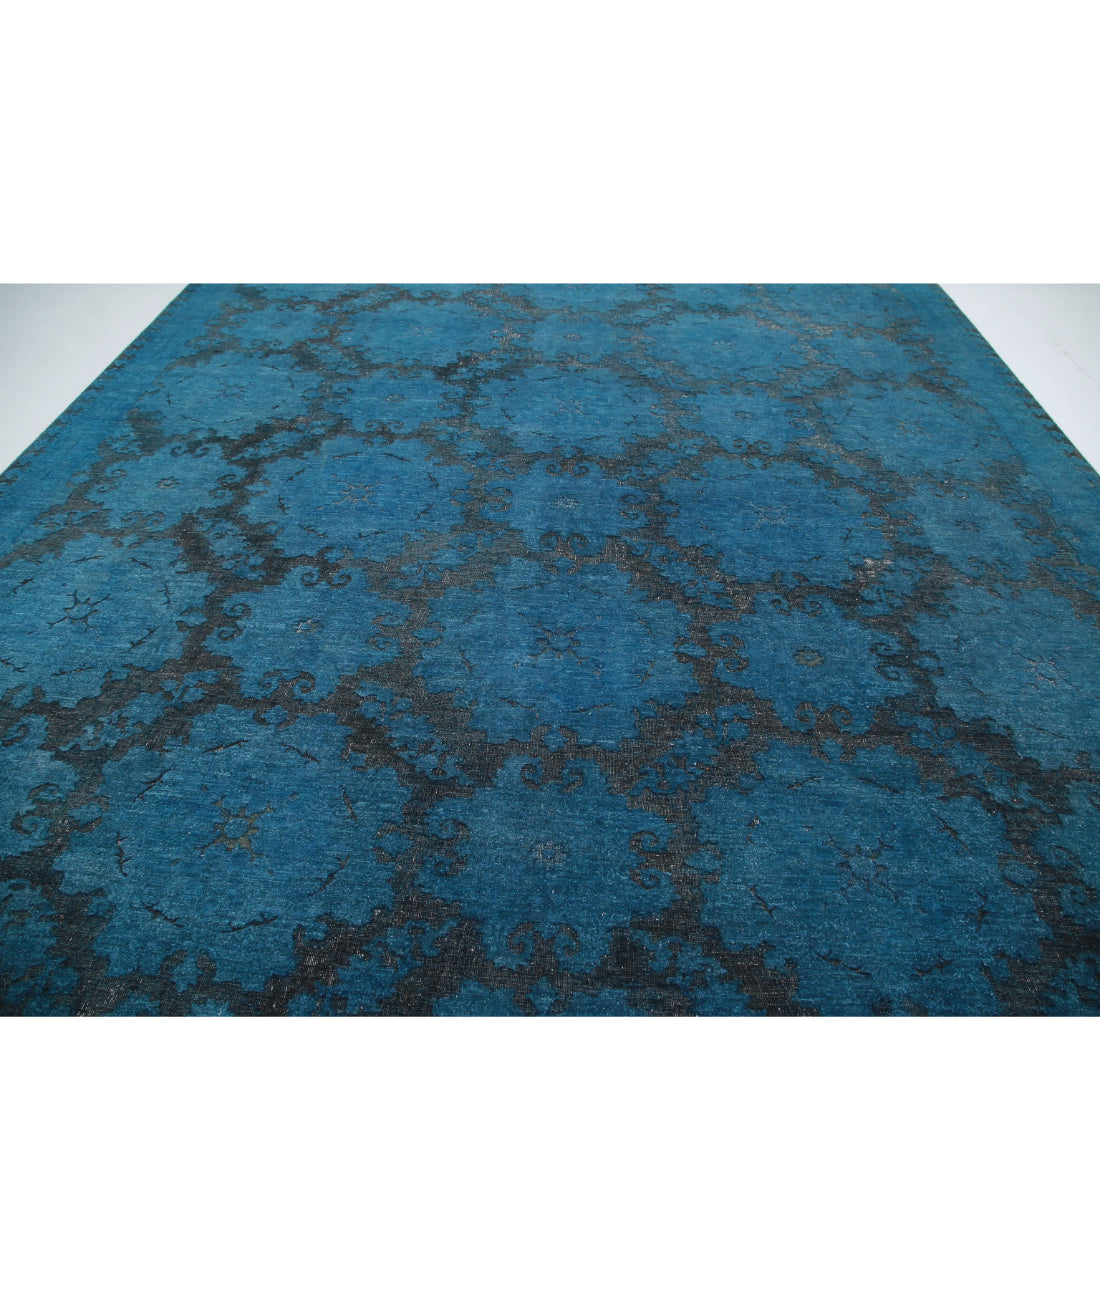 Hand Knotted Onyx Wool Rug - 11'10'' x 14'7'' 11'10'' x 14'7'' (355 X 438) / Blue / Blue